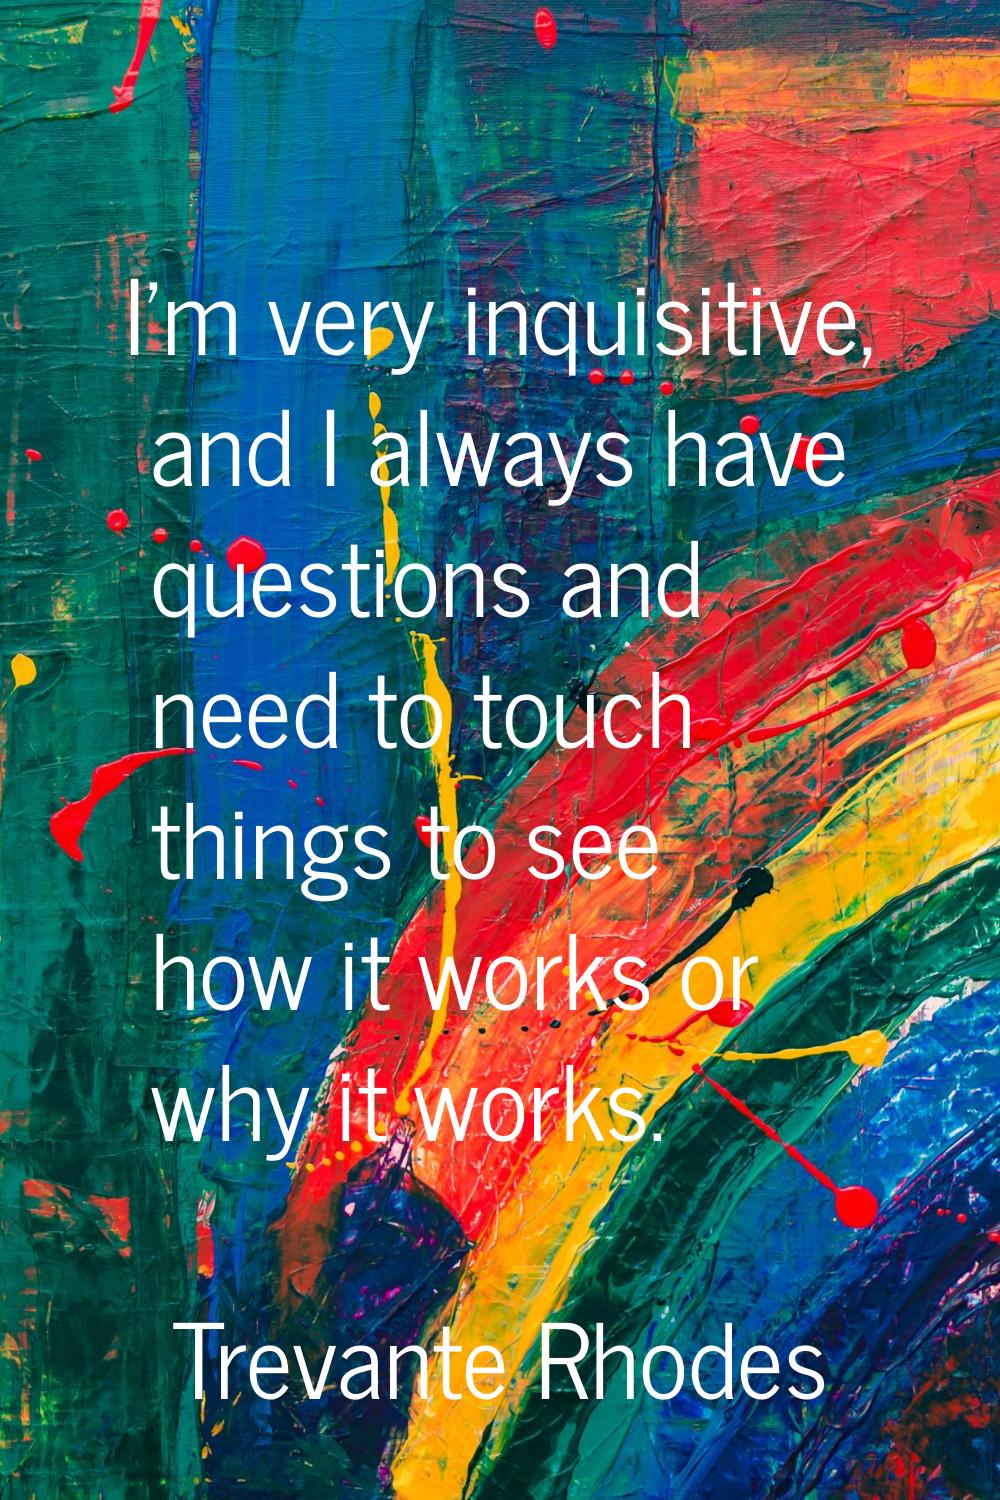 I'm very inquisitive, and I always have questions and need to touch things to see how it works or w